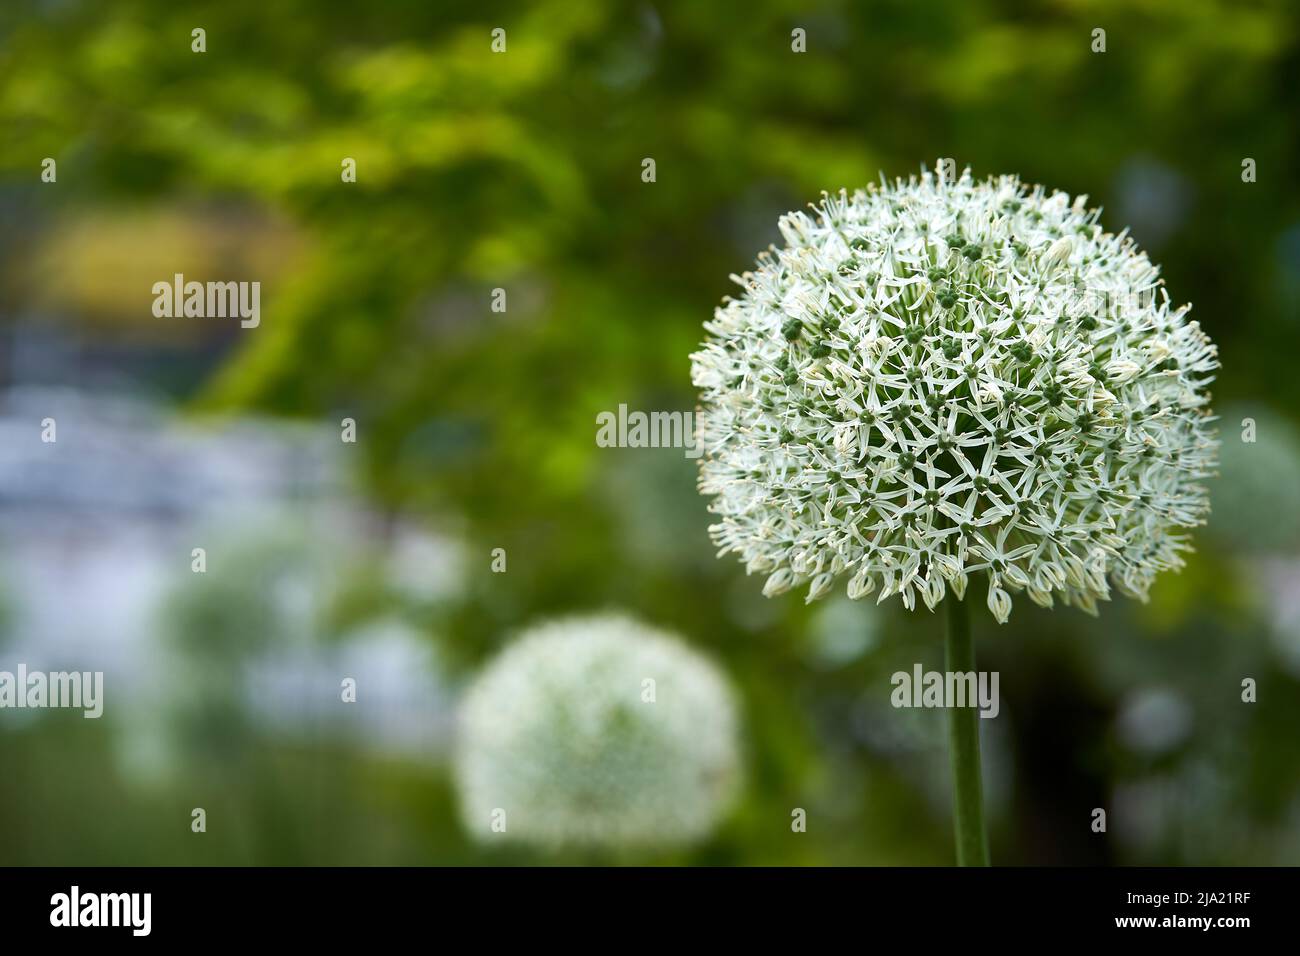 focus on white allium flower head in foreground with soft green focus in background Stock Photo